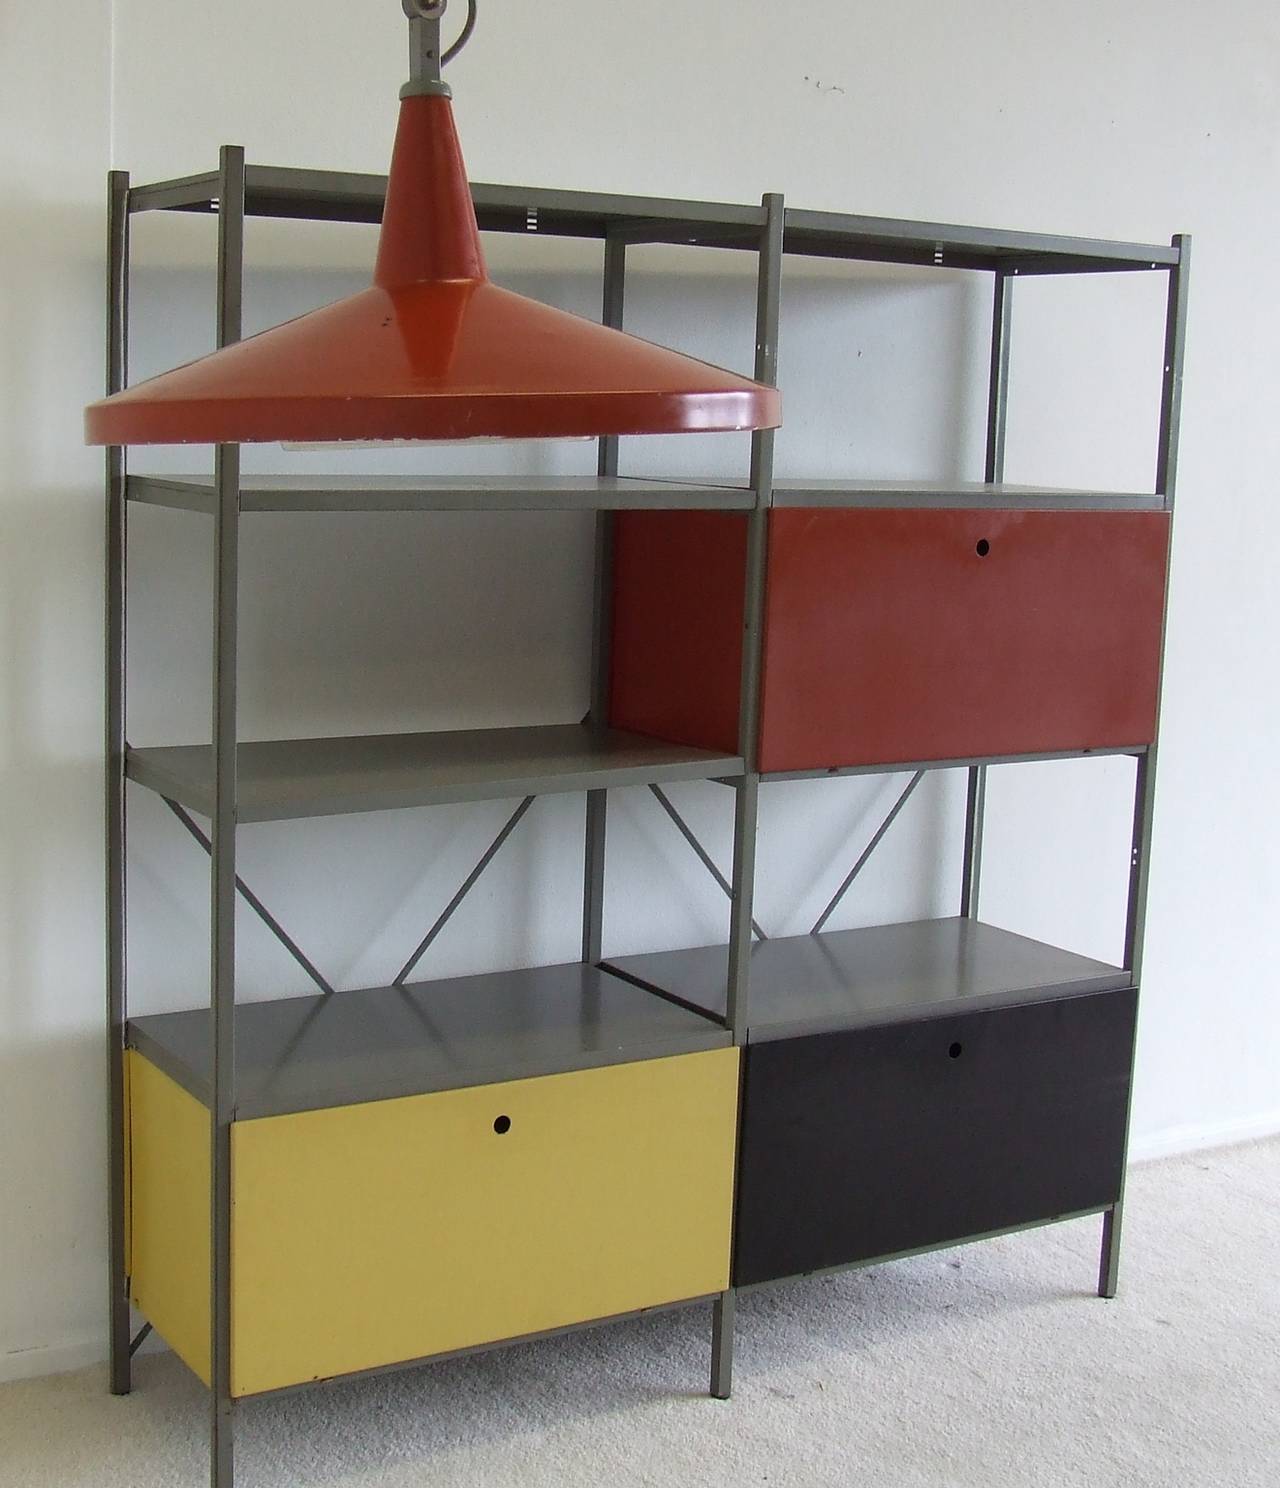 Typical modular wall system of the 1950s. Designer: Wim Rietveld. Manufacturer: Gispen Holland. Model range: 663. Three closed colored metal flap door storages.